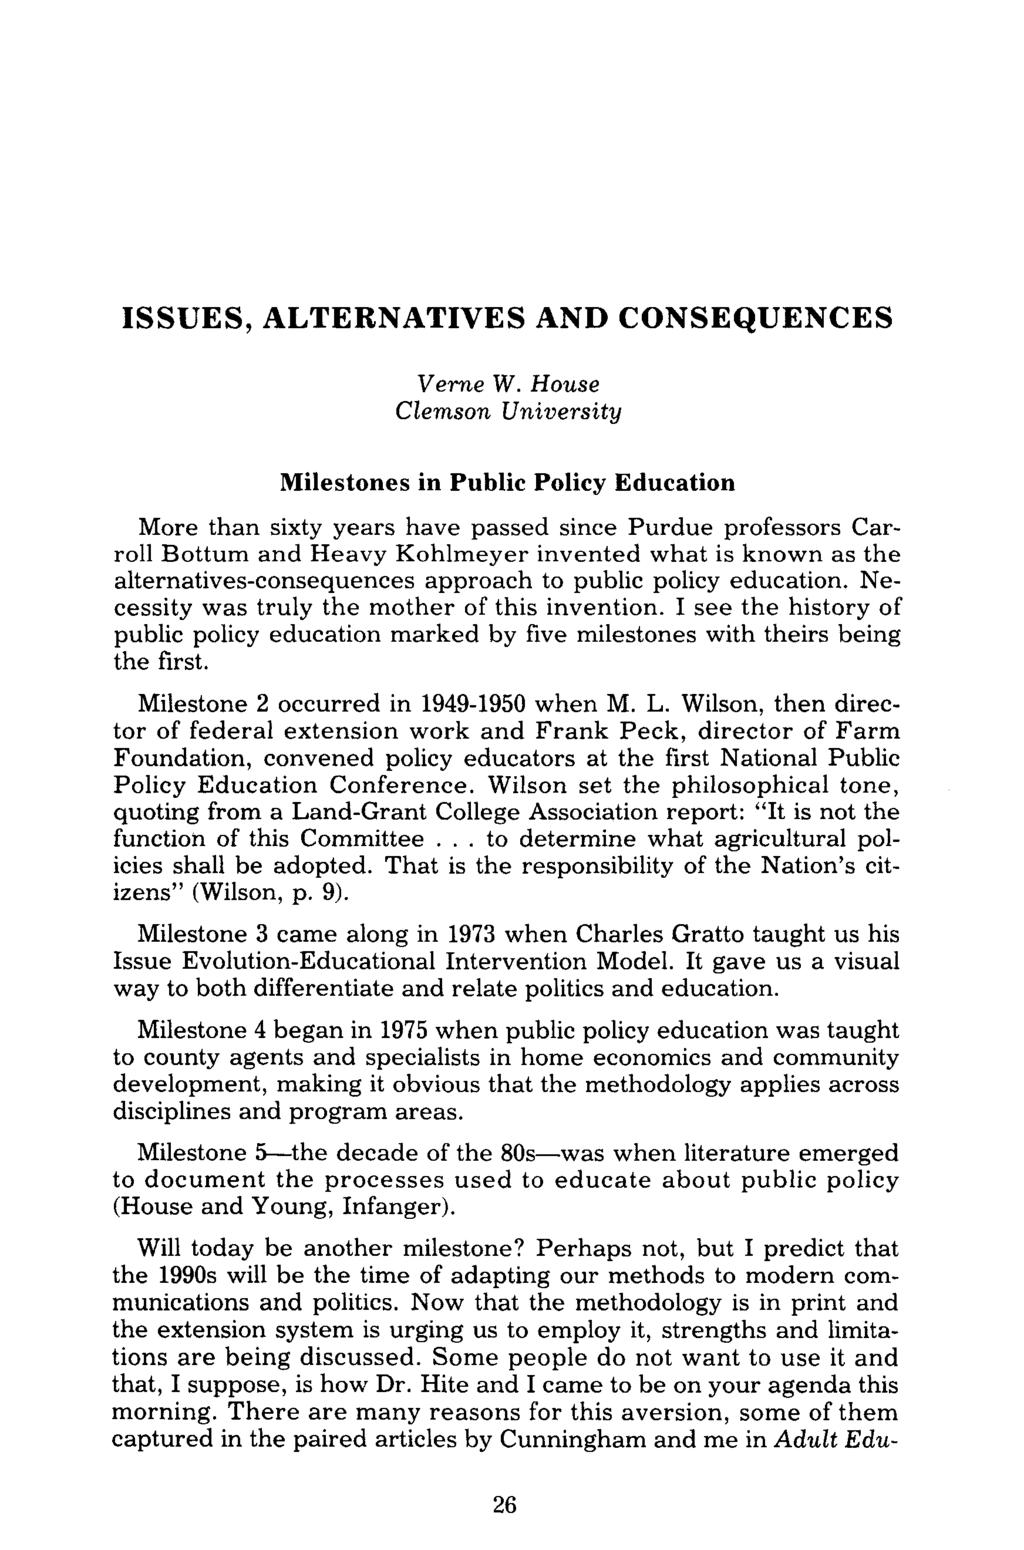 ISSUES, ALTERNATIVES AND CONSEQUENCES Verne W.